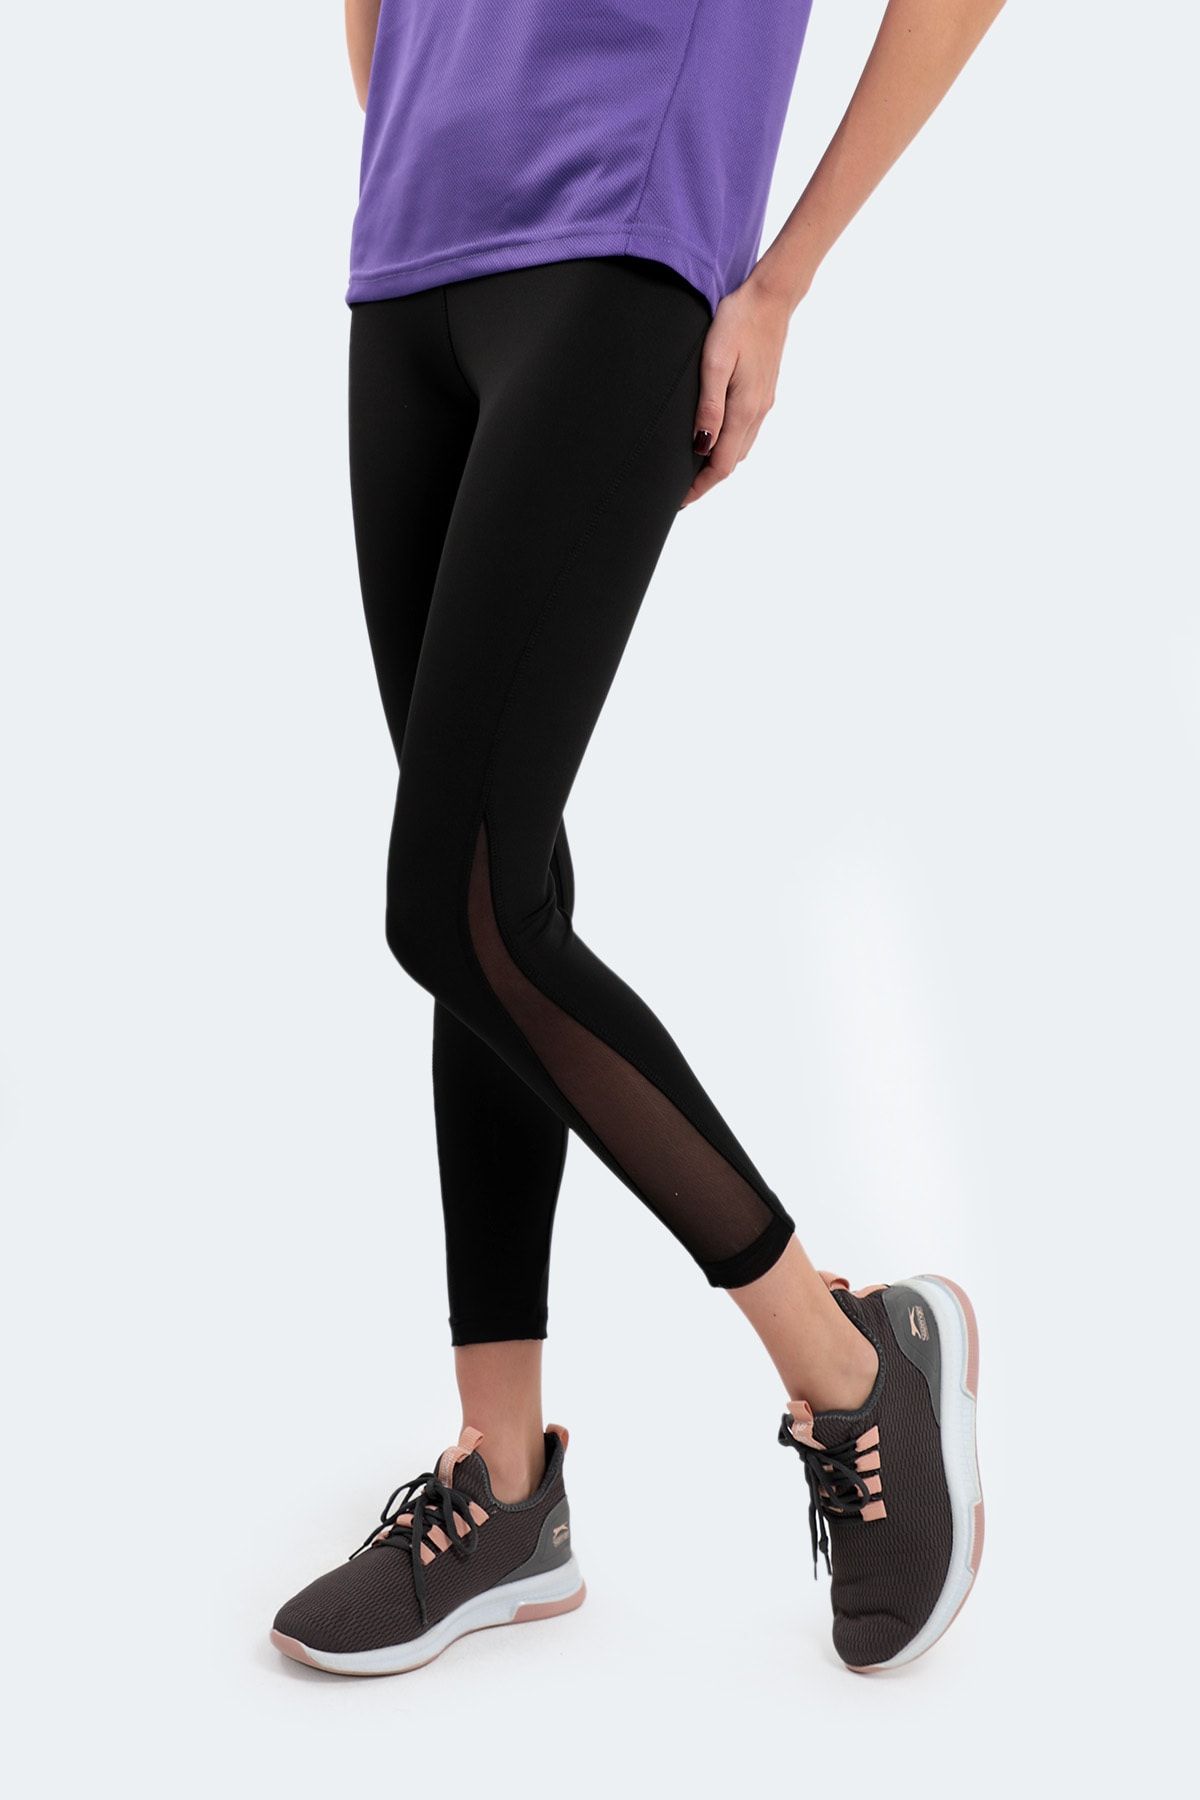 Road Cycling Leggings | International Society of Precision Agriculture